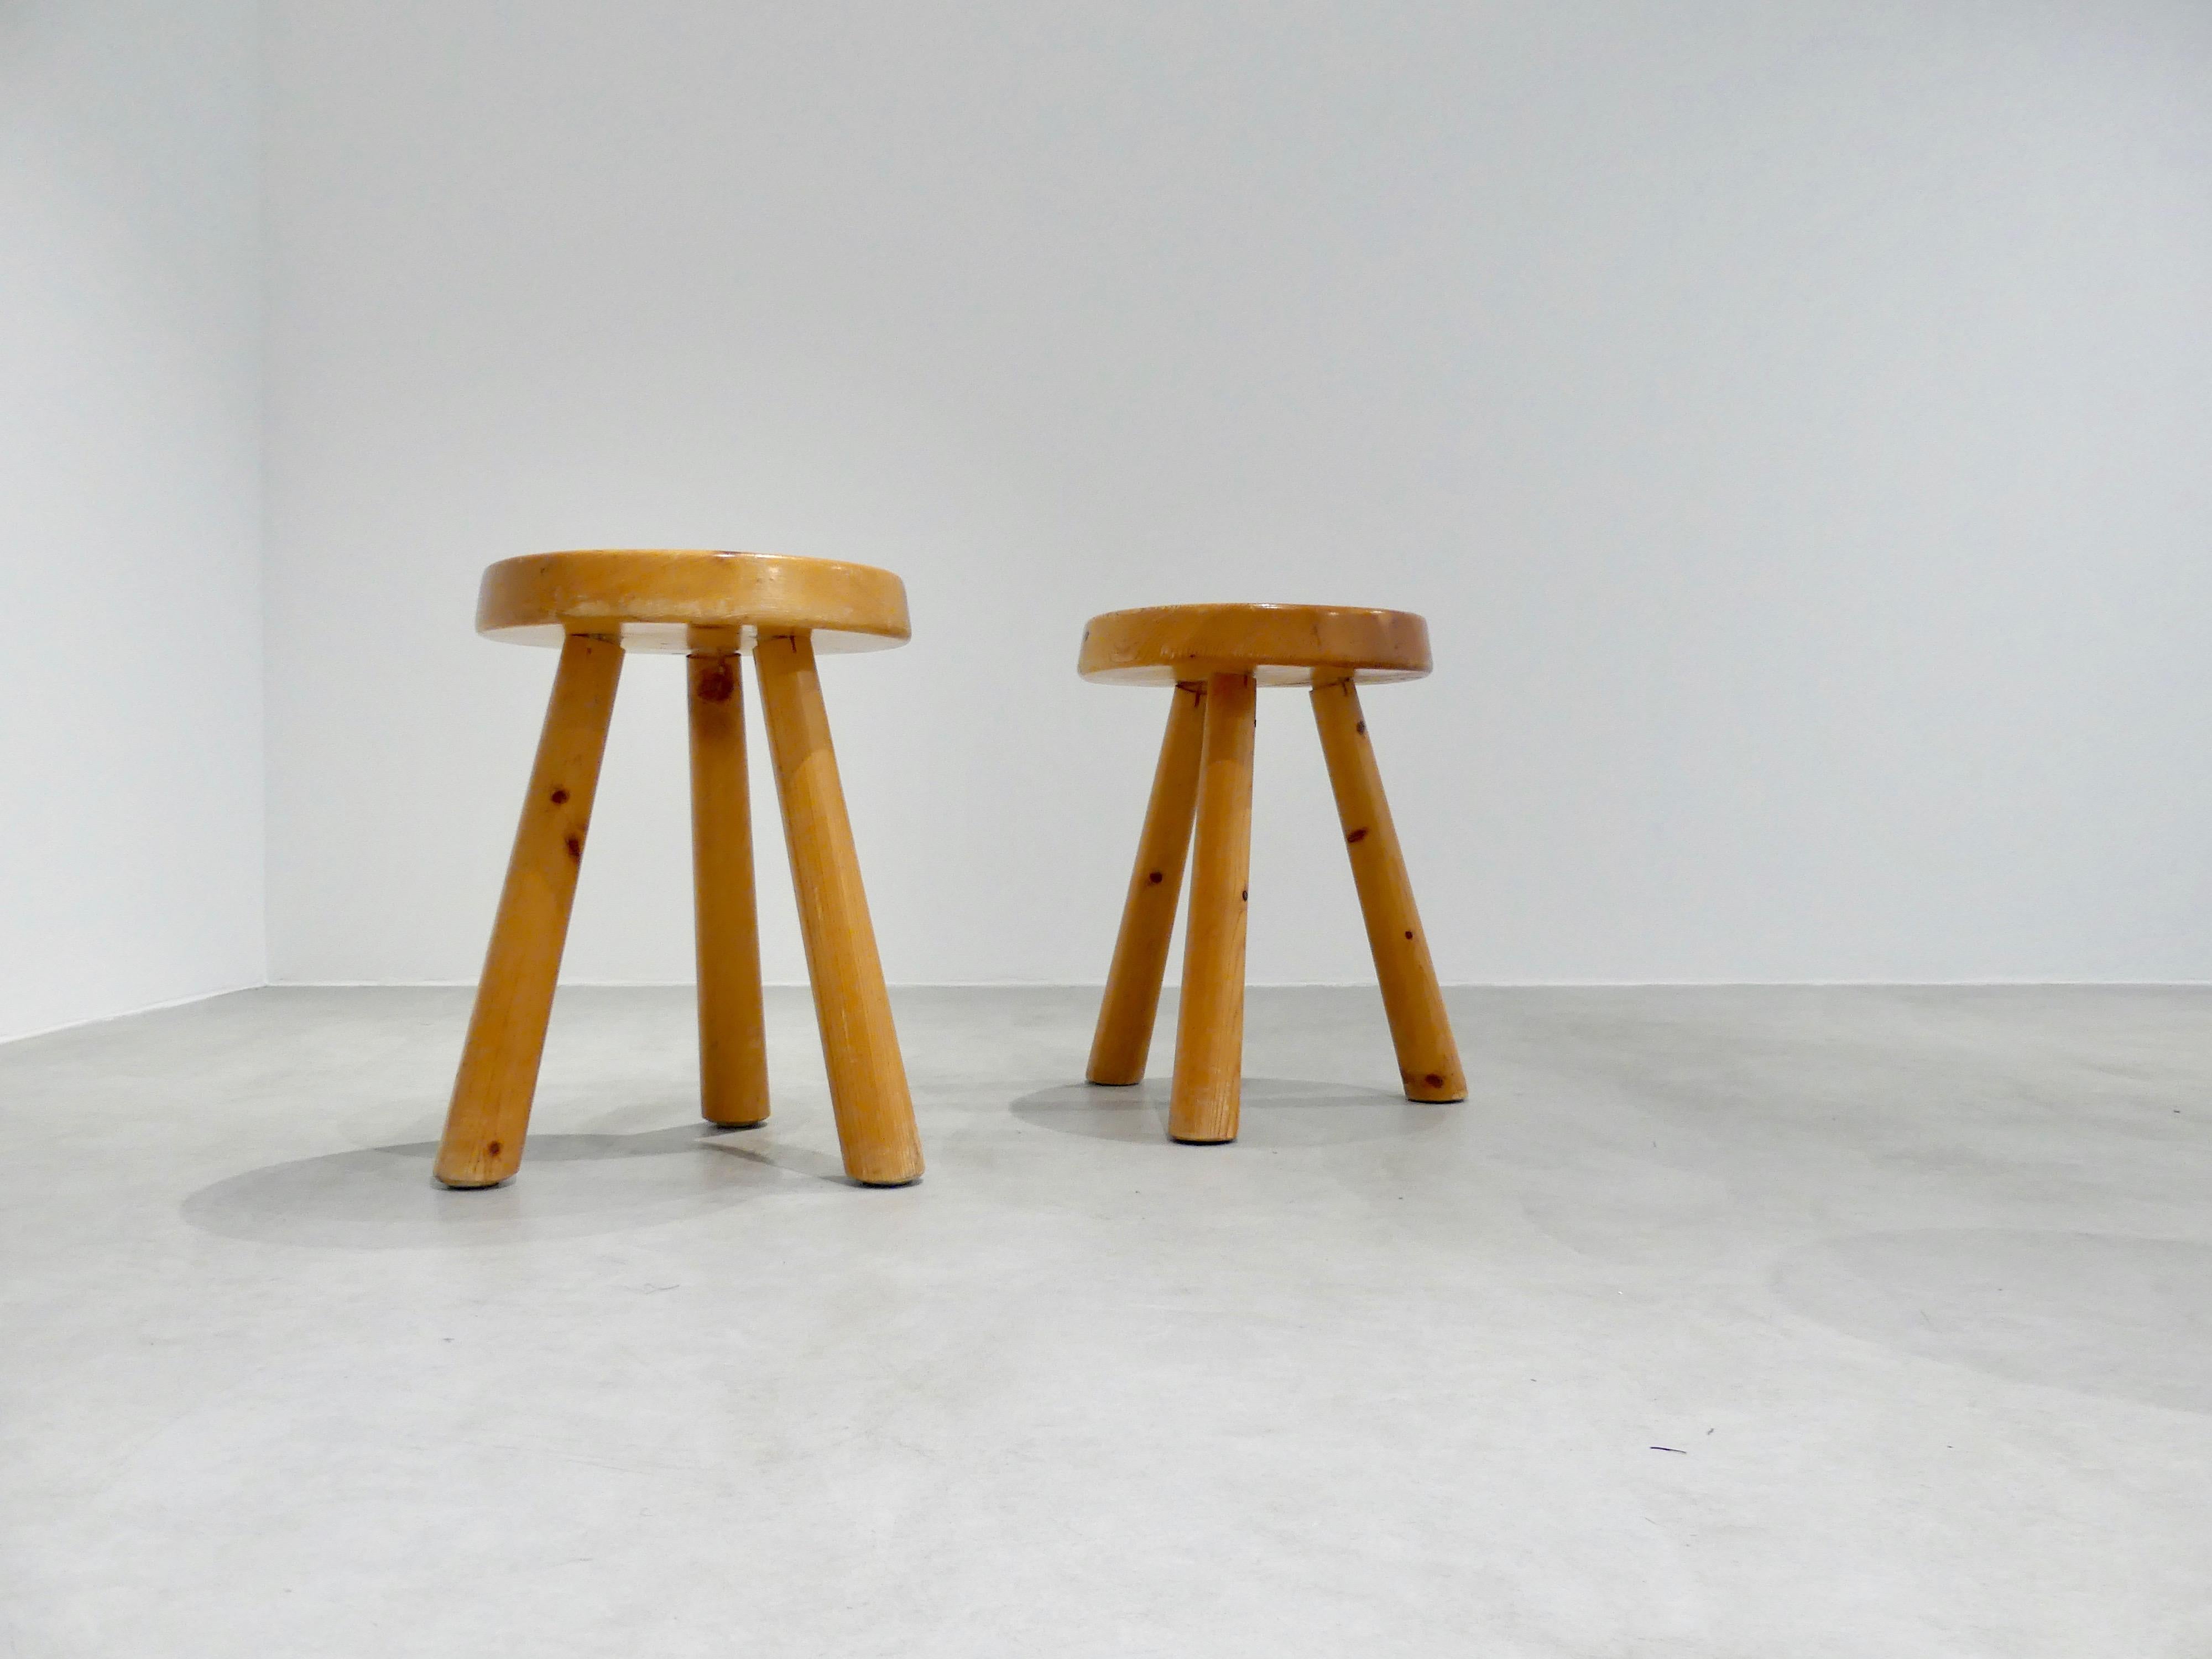 Tripod stools, made of pine wood, from the 1950s.
Charlotte Perriand from Les Arcs

Several stool in stock.